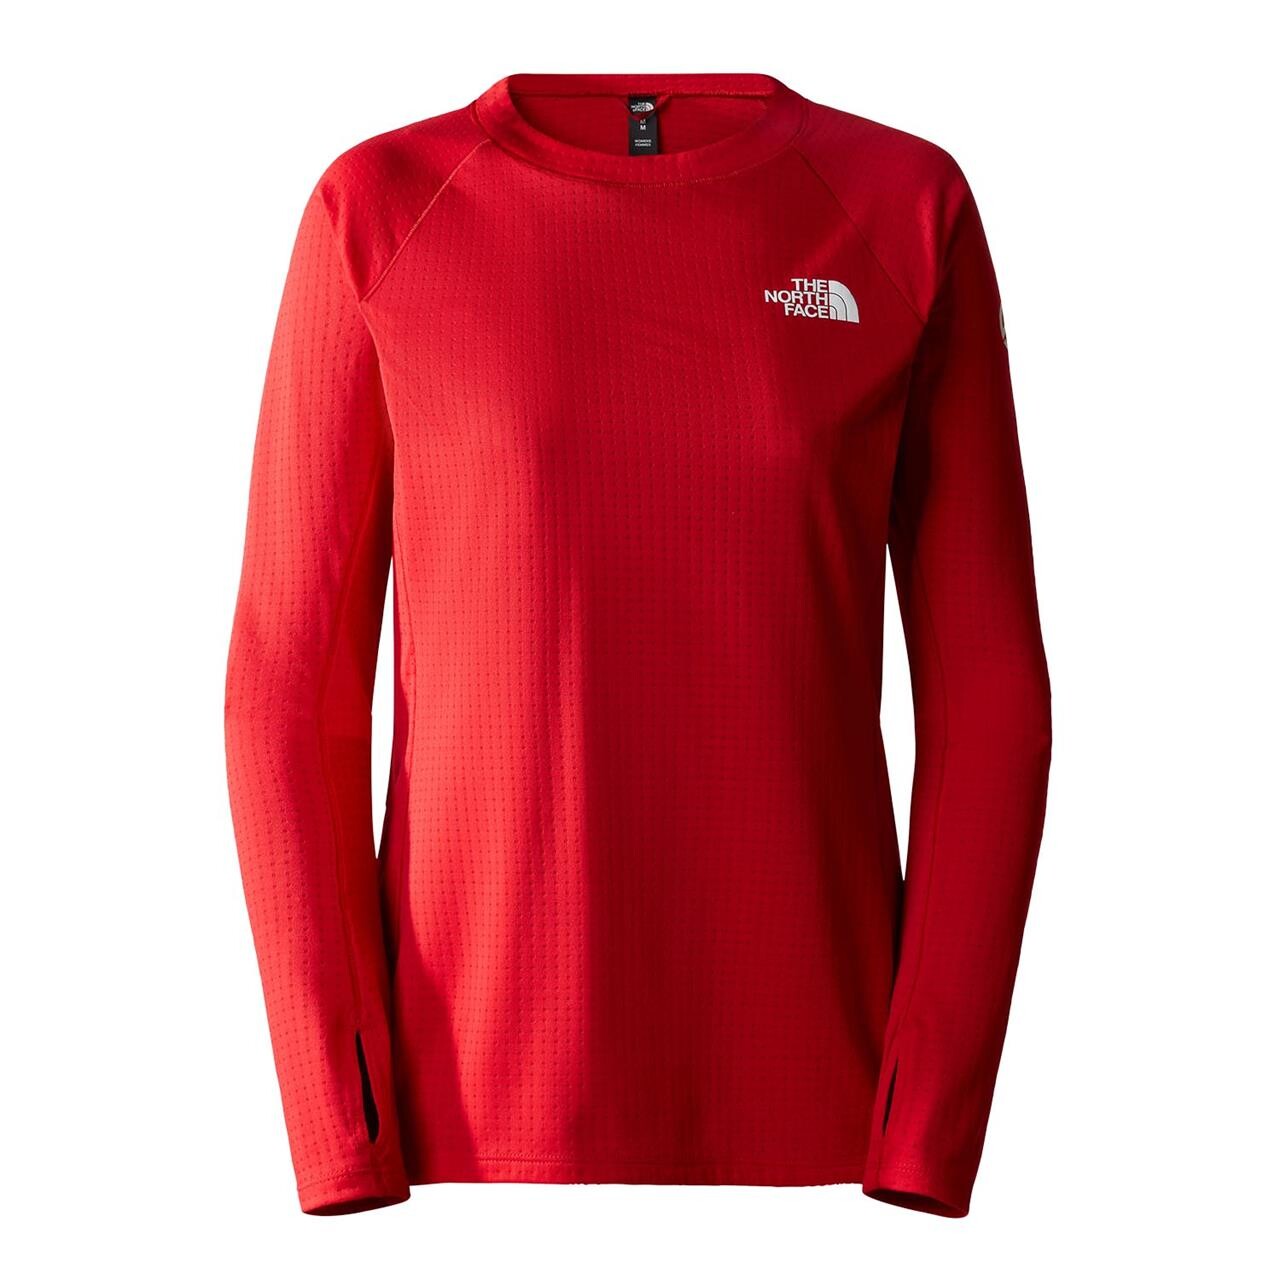 Billede af The North Face Womens Summit Pro 120 Crew (Rød (TNF RED) Large)